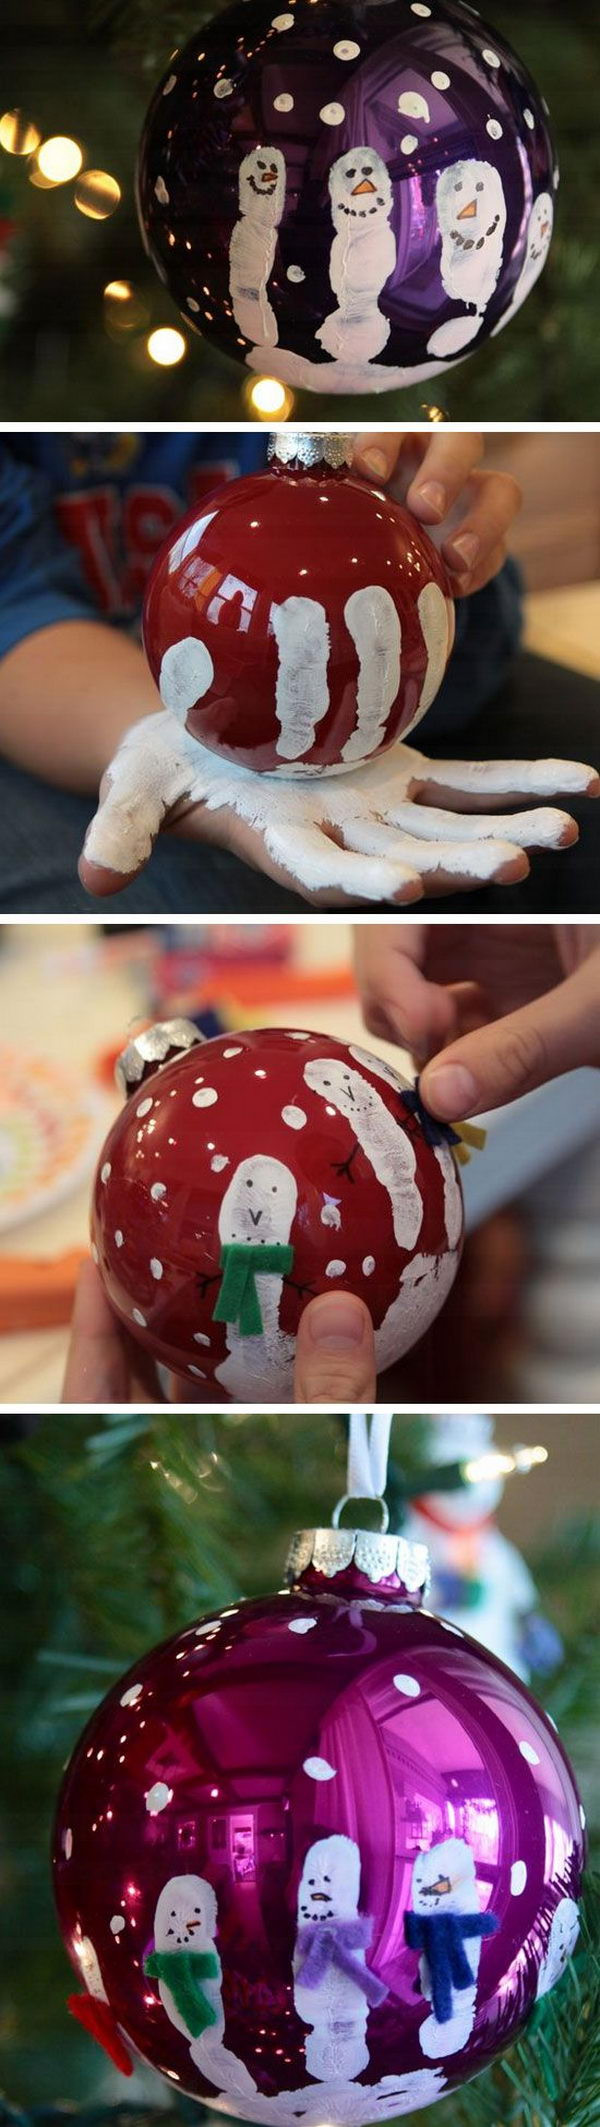 DIY Kids Christmas Ornaments
 Easy & Creative Christmas DIY Projects That Kids Can Do